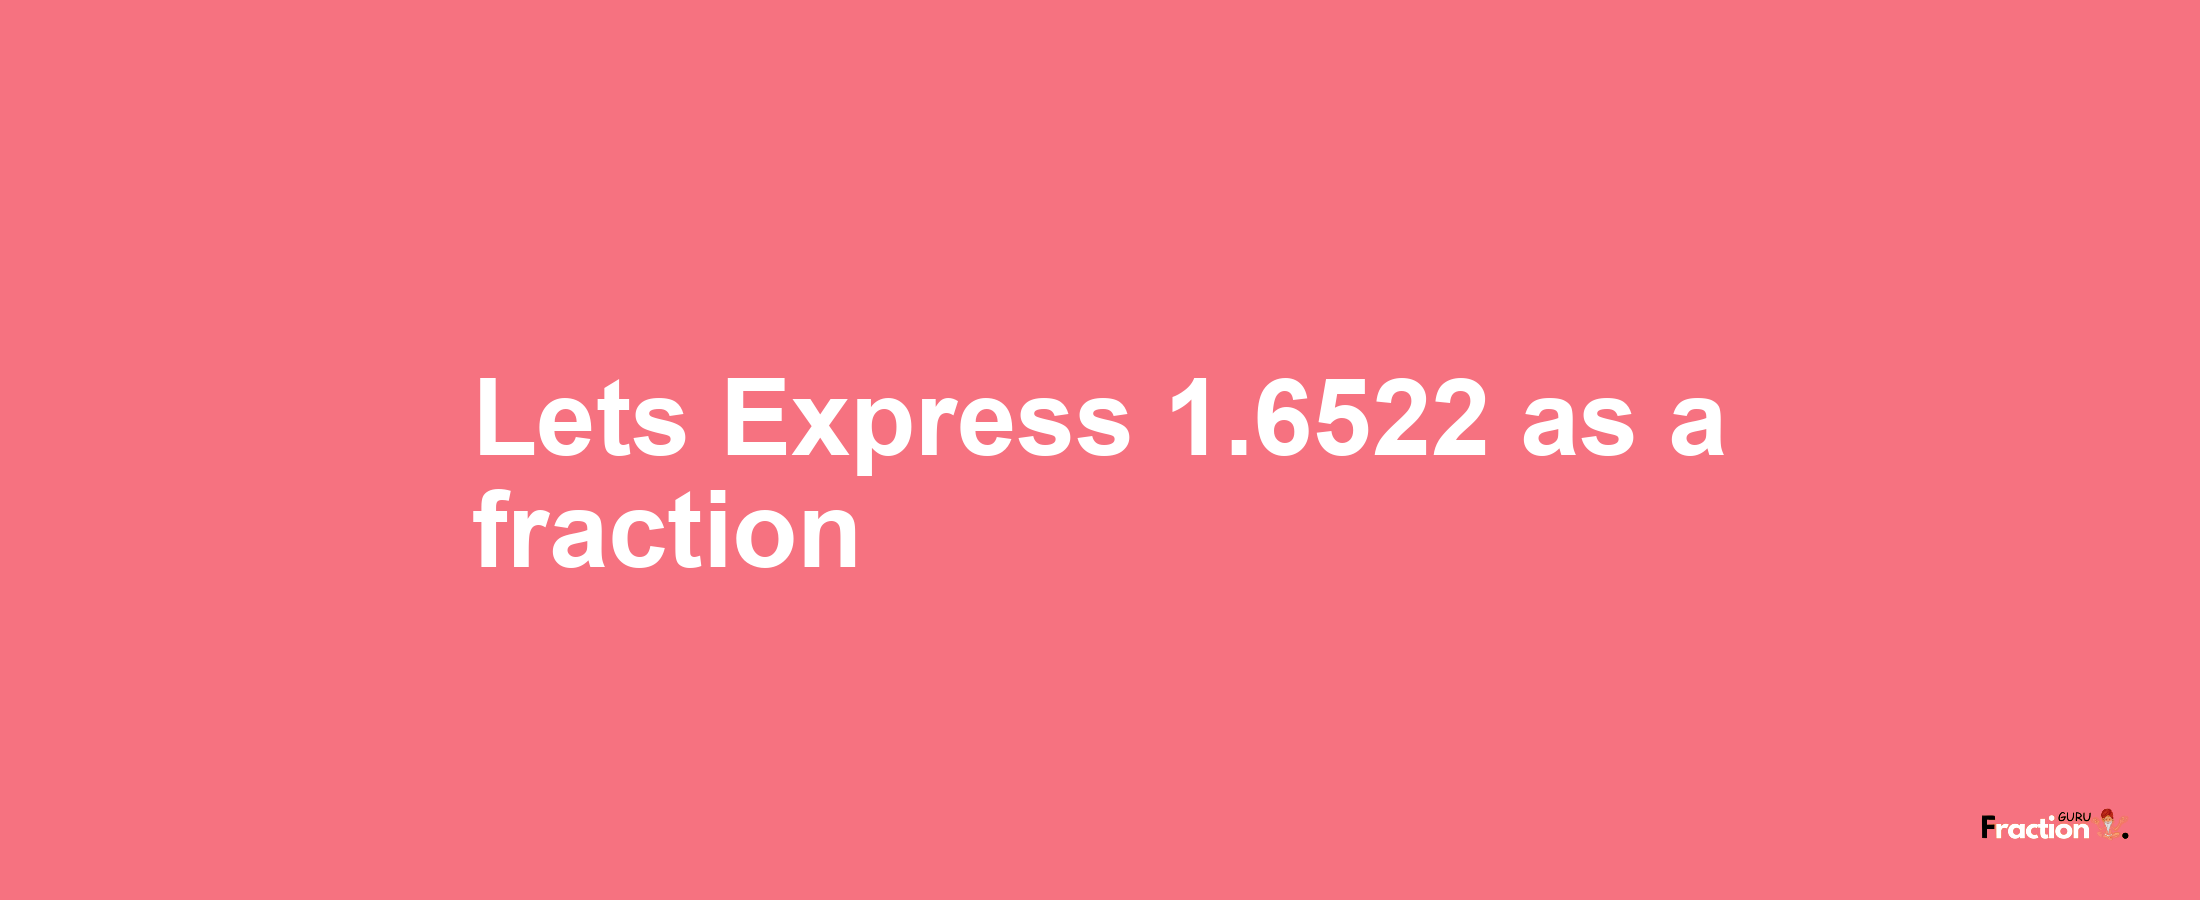 Lets Express 1.6522 as afraction